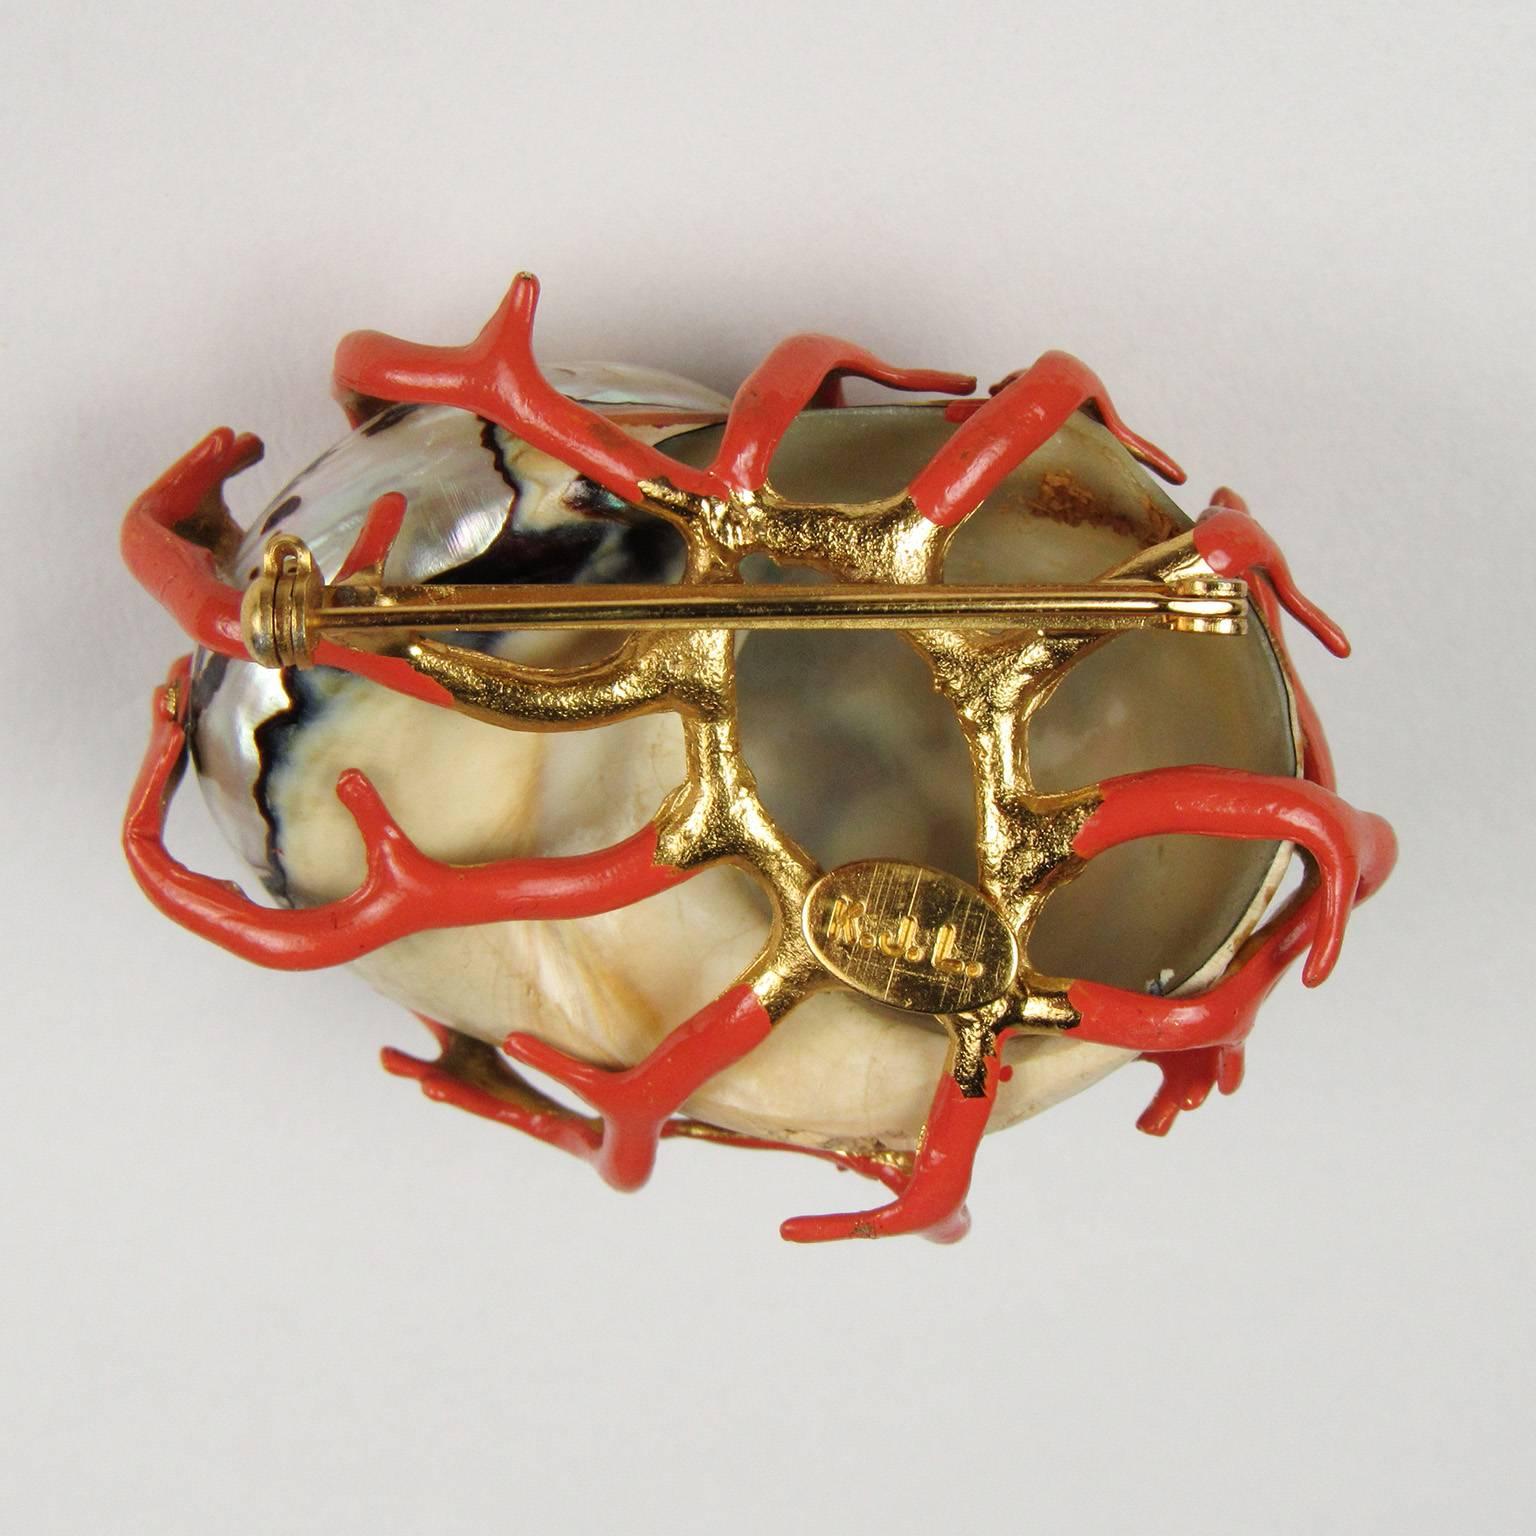 Vintage Kenneth Jay Lane faux coral shell form brooch, circa 1960s
comprised of a mother-of-pearl shell encrusted with faux coral, with gold filled setting, marked 